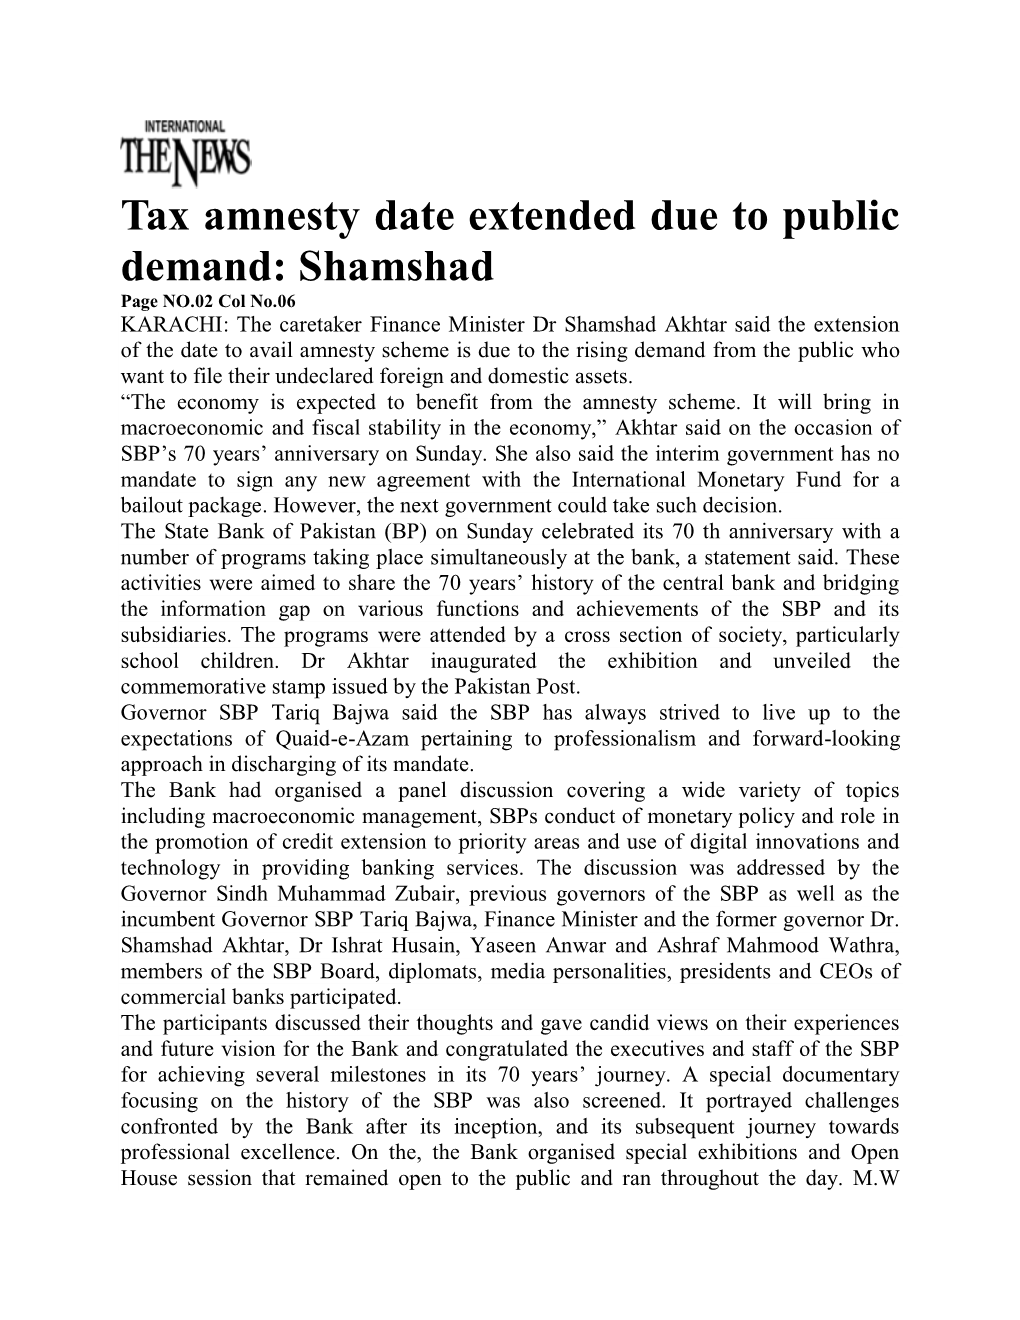 Tax Amnesty Date Extended Due to Public Demand: Shamshad